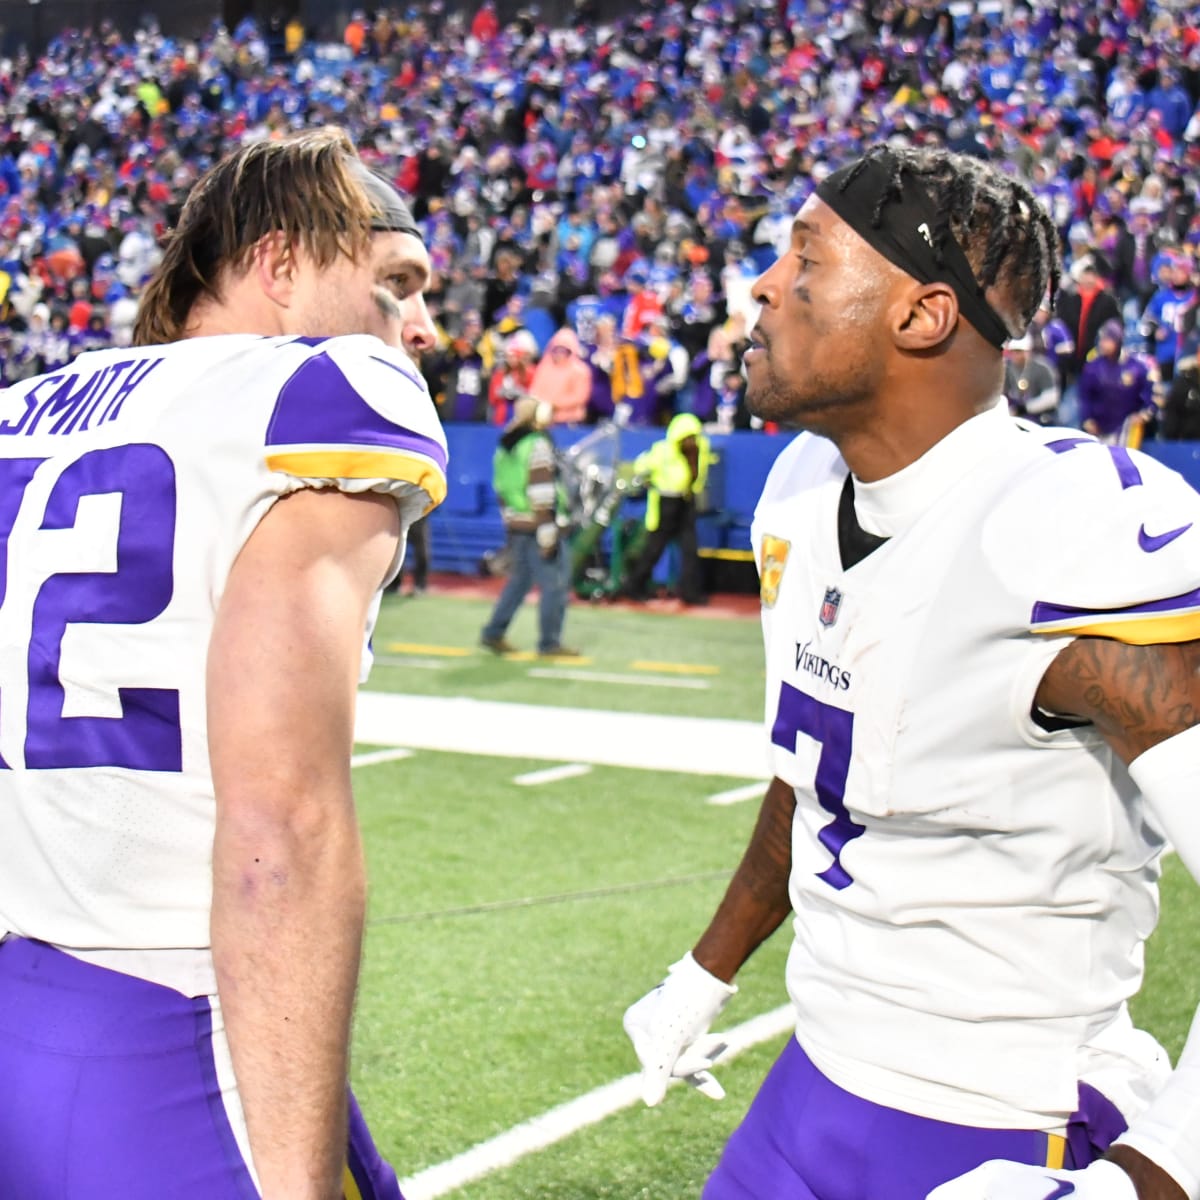 Bring Me The Sports' Week 2 NFL power rankings: Vikings in tough position -  Sports Illustrated Minnesota Sports, News, Analysis, and More